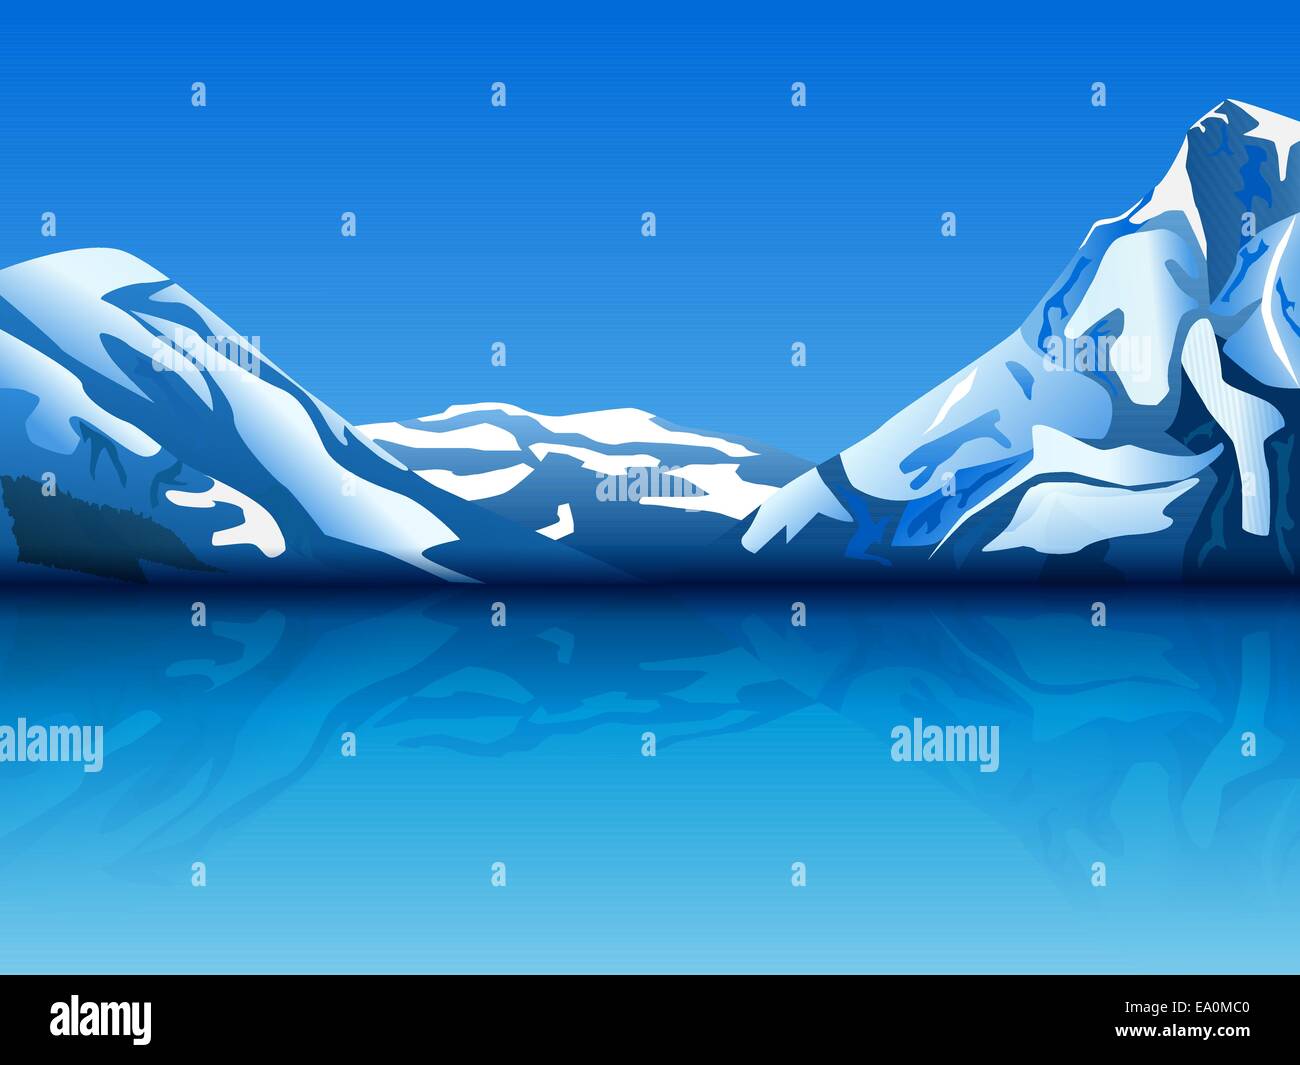 vector illustration of snowy mountains with reflection in the water, eps10 file, transparency used Stock Vector